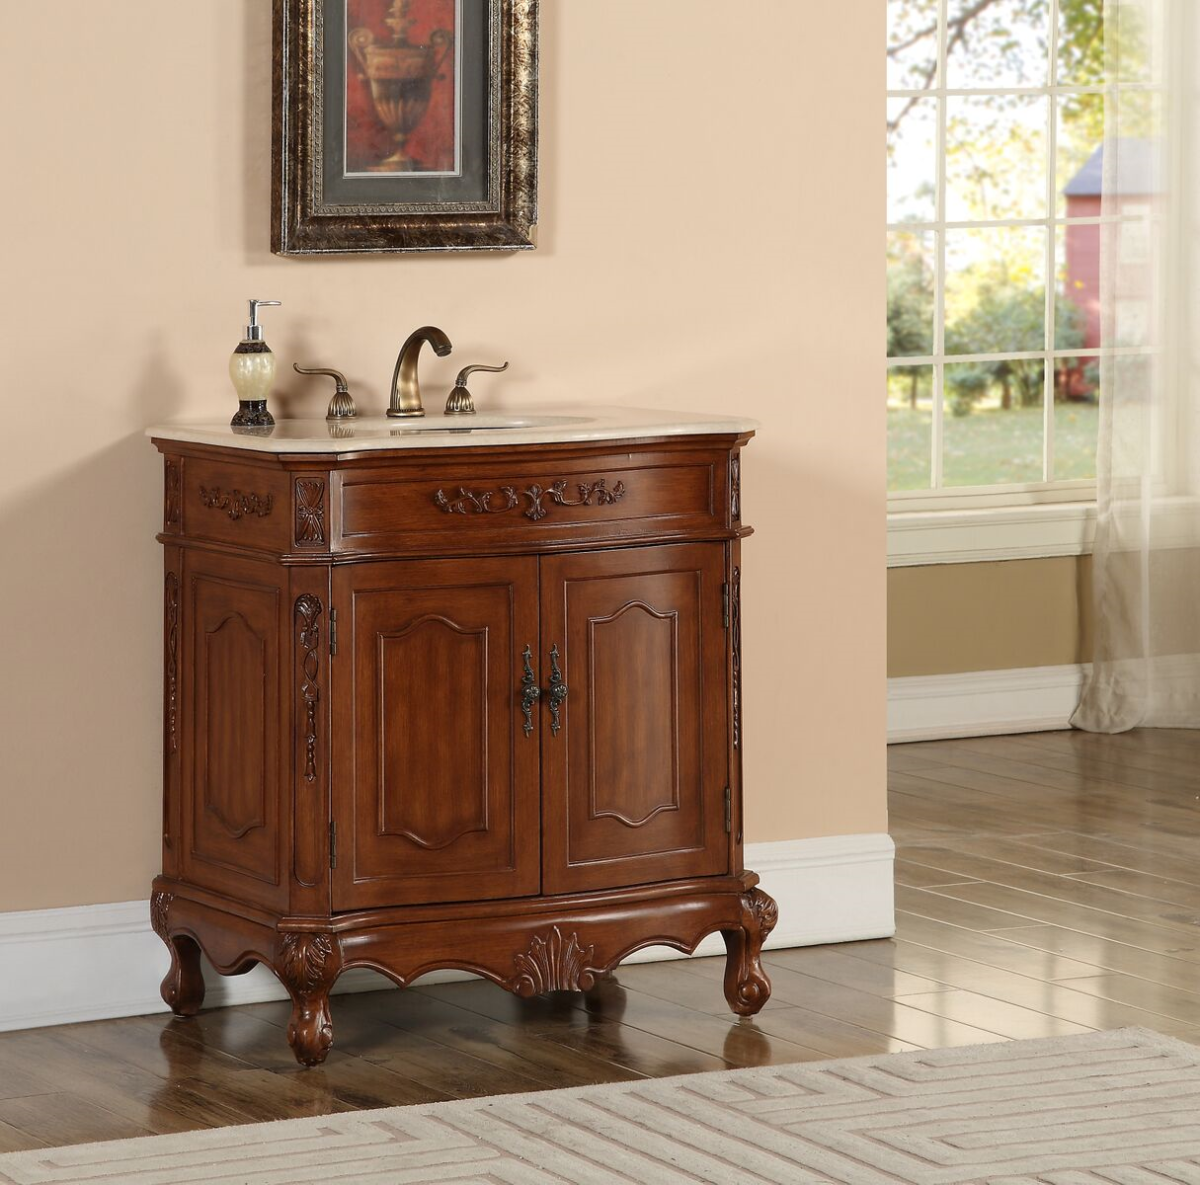 32" Deep Chestnut Finish Vanity with Mirror, Med Cab, and Linen Cabinet Options